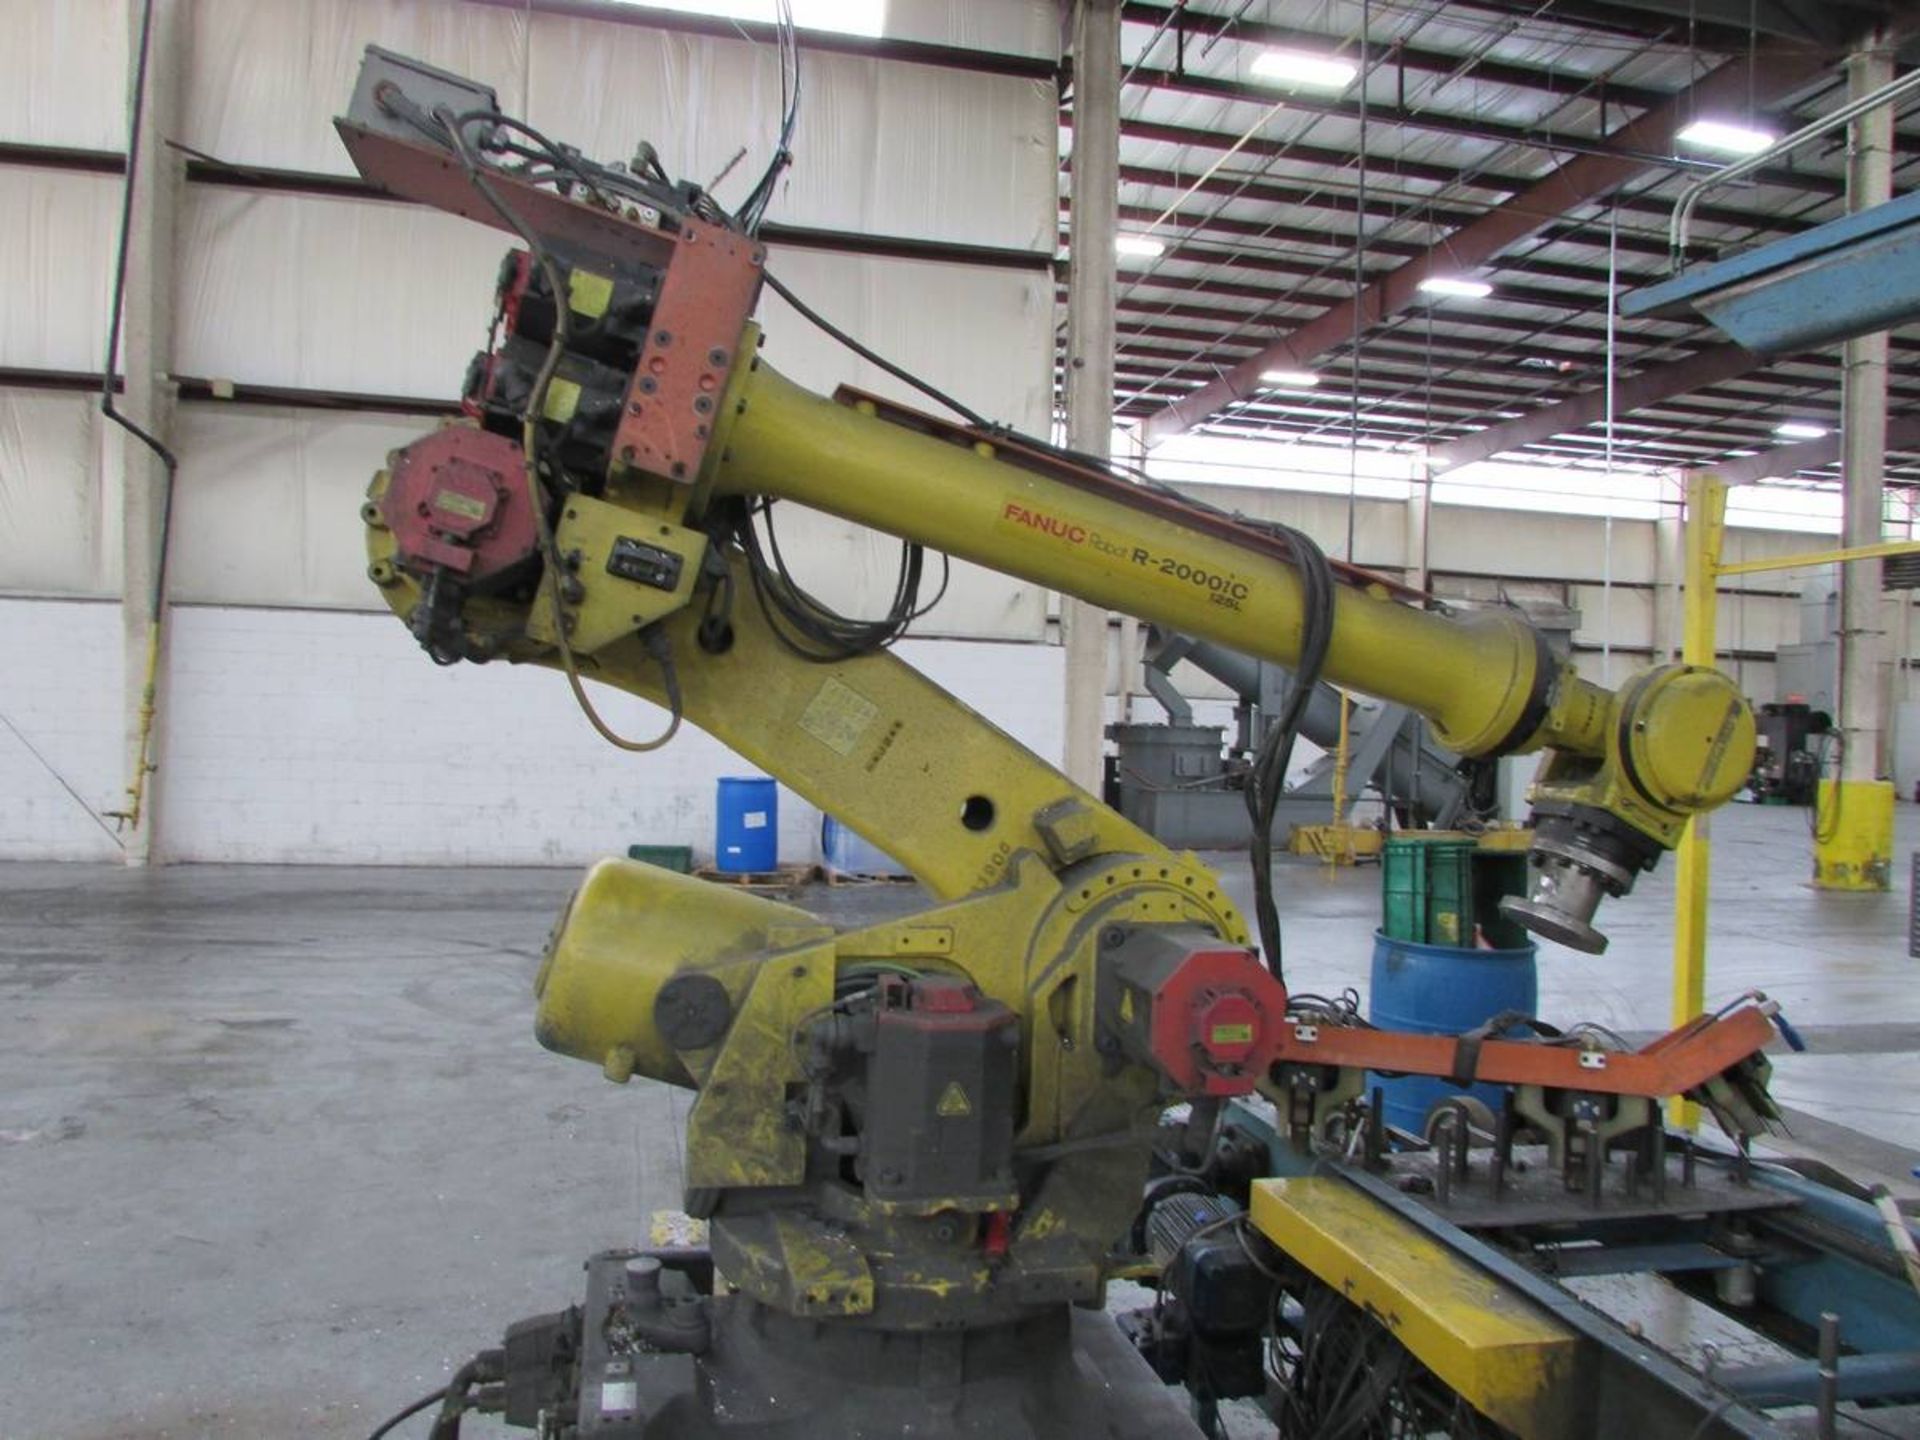 2015 Fanuc R 2000 iC 125L 6 Axis Material Handling Robot - Image 5 of 11